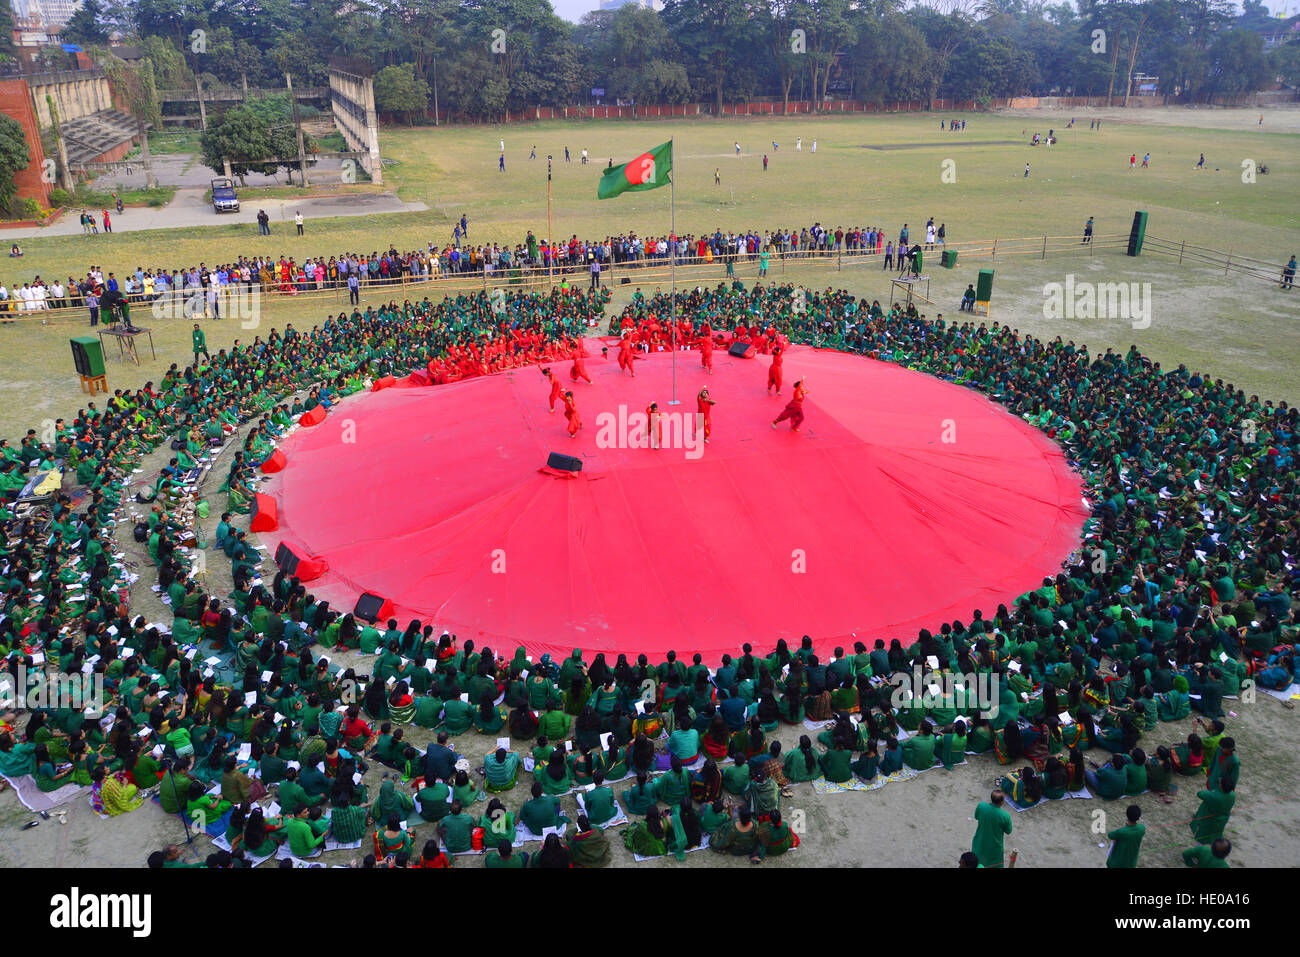 Dhaka, Bangladesh. 16th Dec, 2016. Bangladeshi Cultural Organization Chayanot organized a cultural program at Dhaka University play ground during the Victory Day celebrations in Dhaka, Bangladesh. On December 16, 2016  Bangladesh marks its 45th Victory Day to commemorate the victory of the Allied forces High Command over the Pakistani forces in the Bangladesh Liberation War in 1971. Bangladesh became a free nation on 16 December 1971 after a nine-month bloody war with Pakistan. © Mamunur Rashid/Alamy Live News Stock Photo